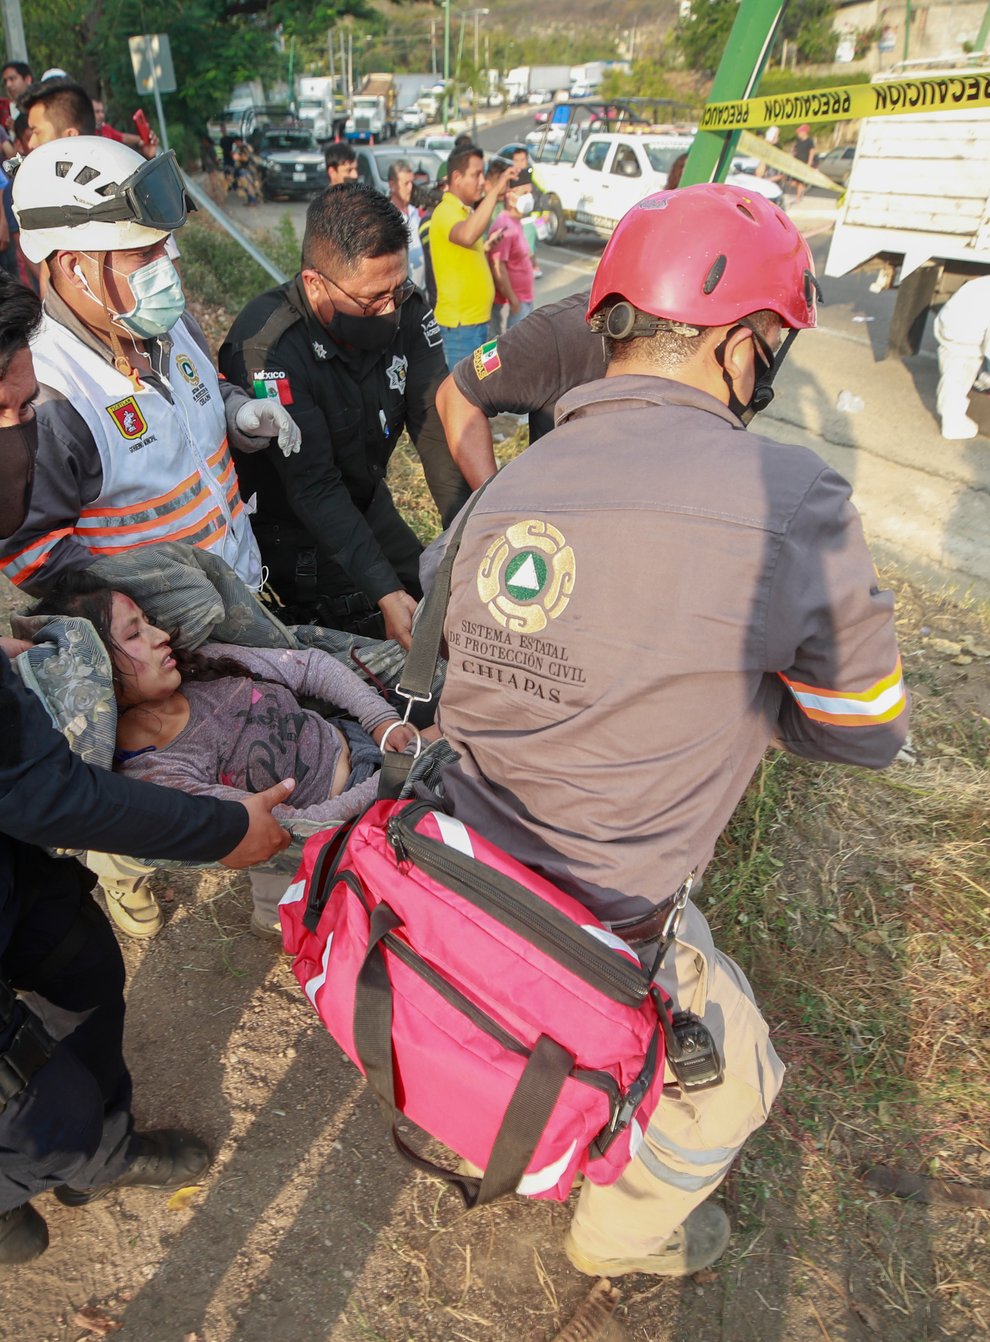 An injured woman is helped by rescue personnel (STR via AP)